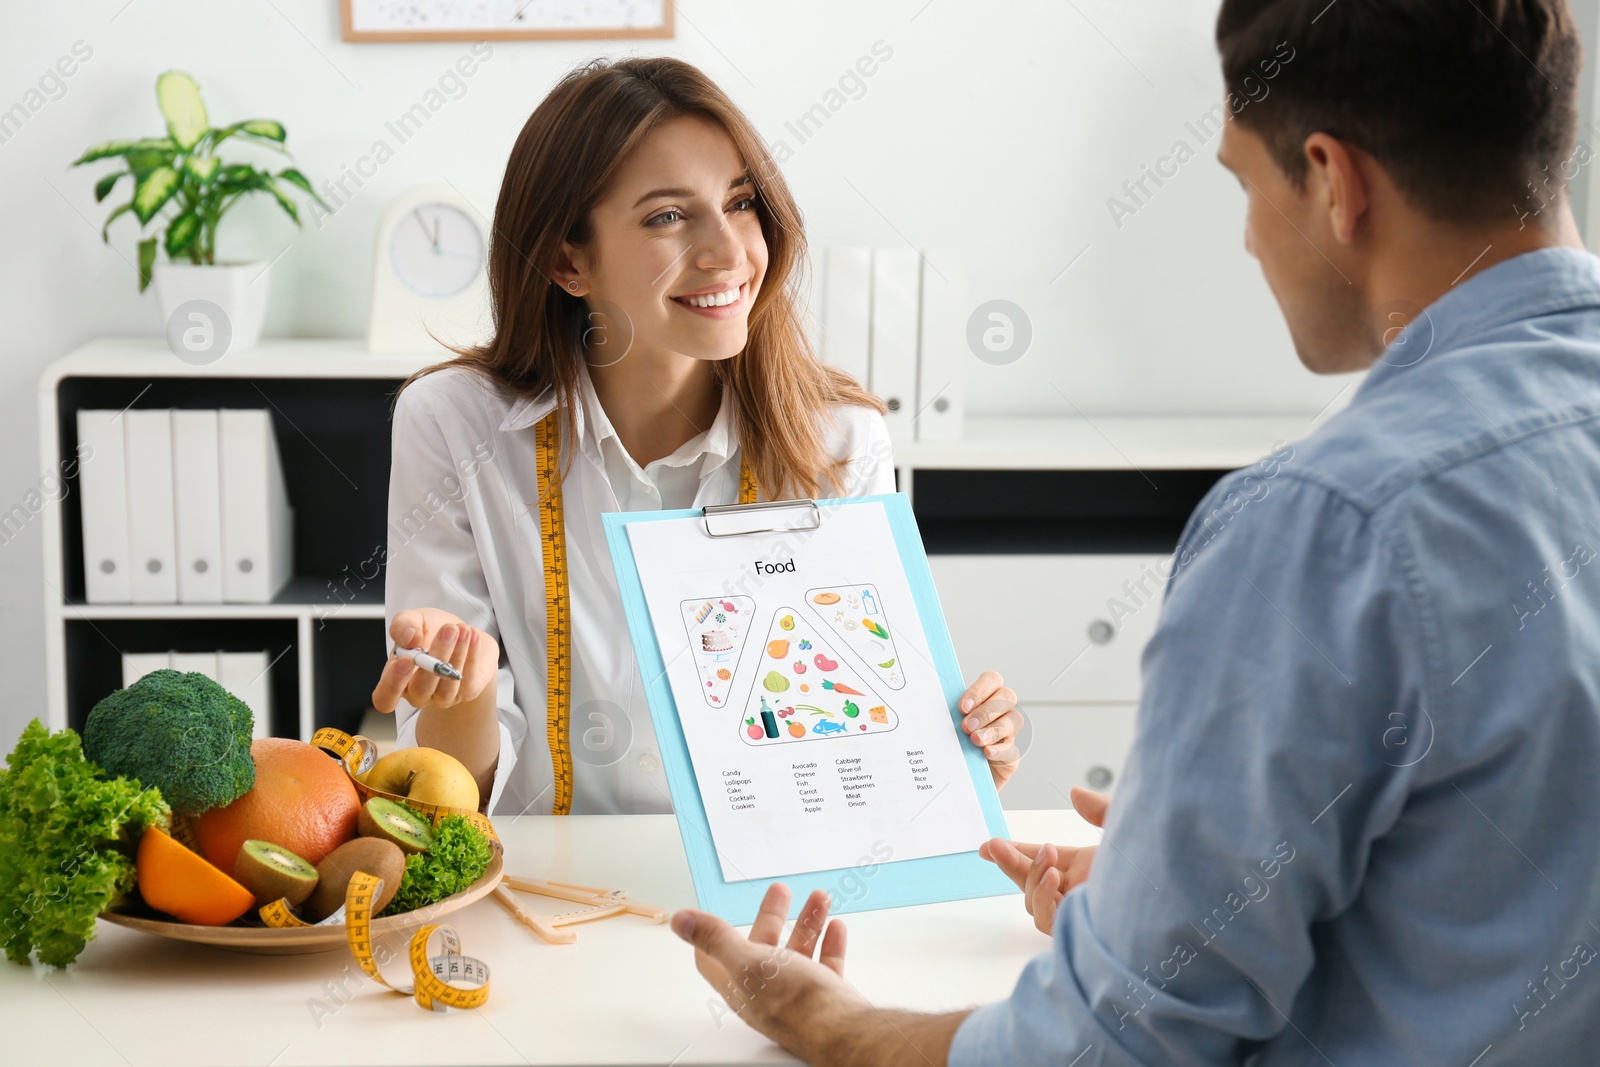 Photo of Young nutritionist consulting patient at table in clinic